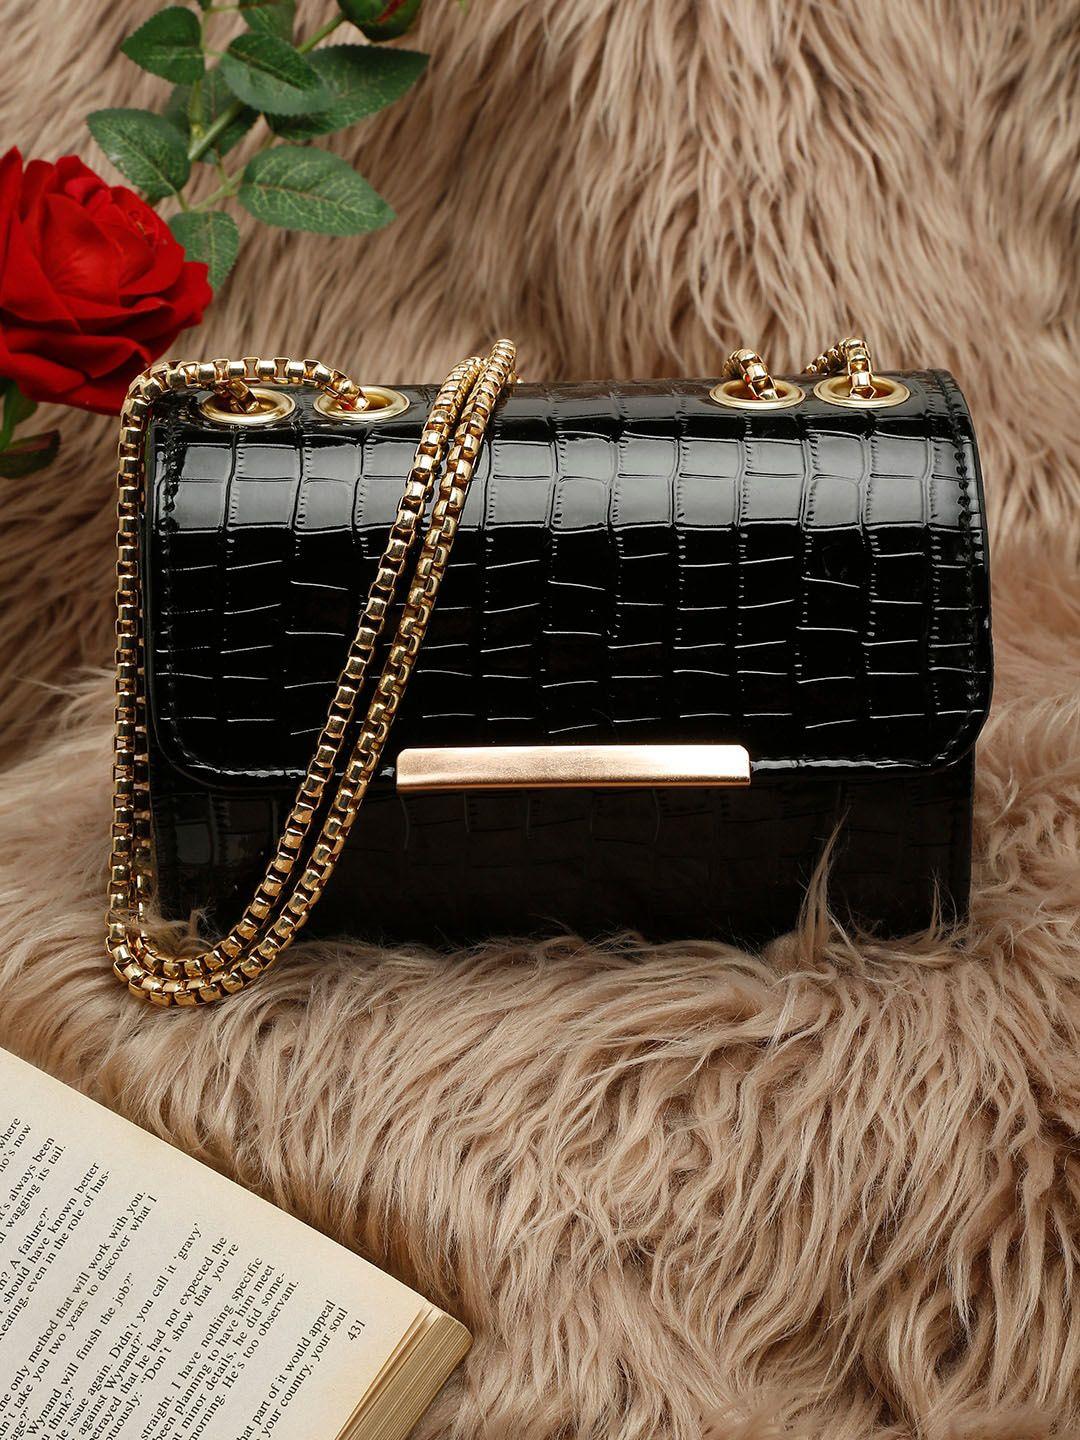 dressberry black textured structured handheld bag with fringed